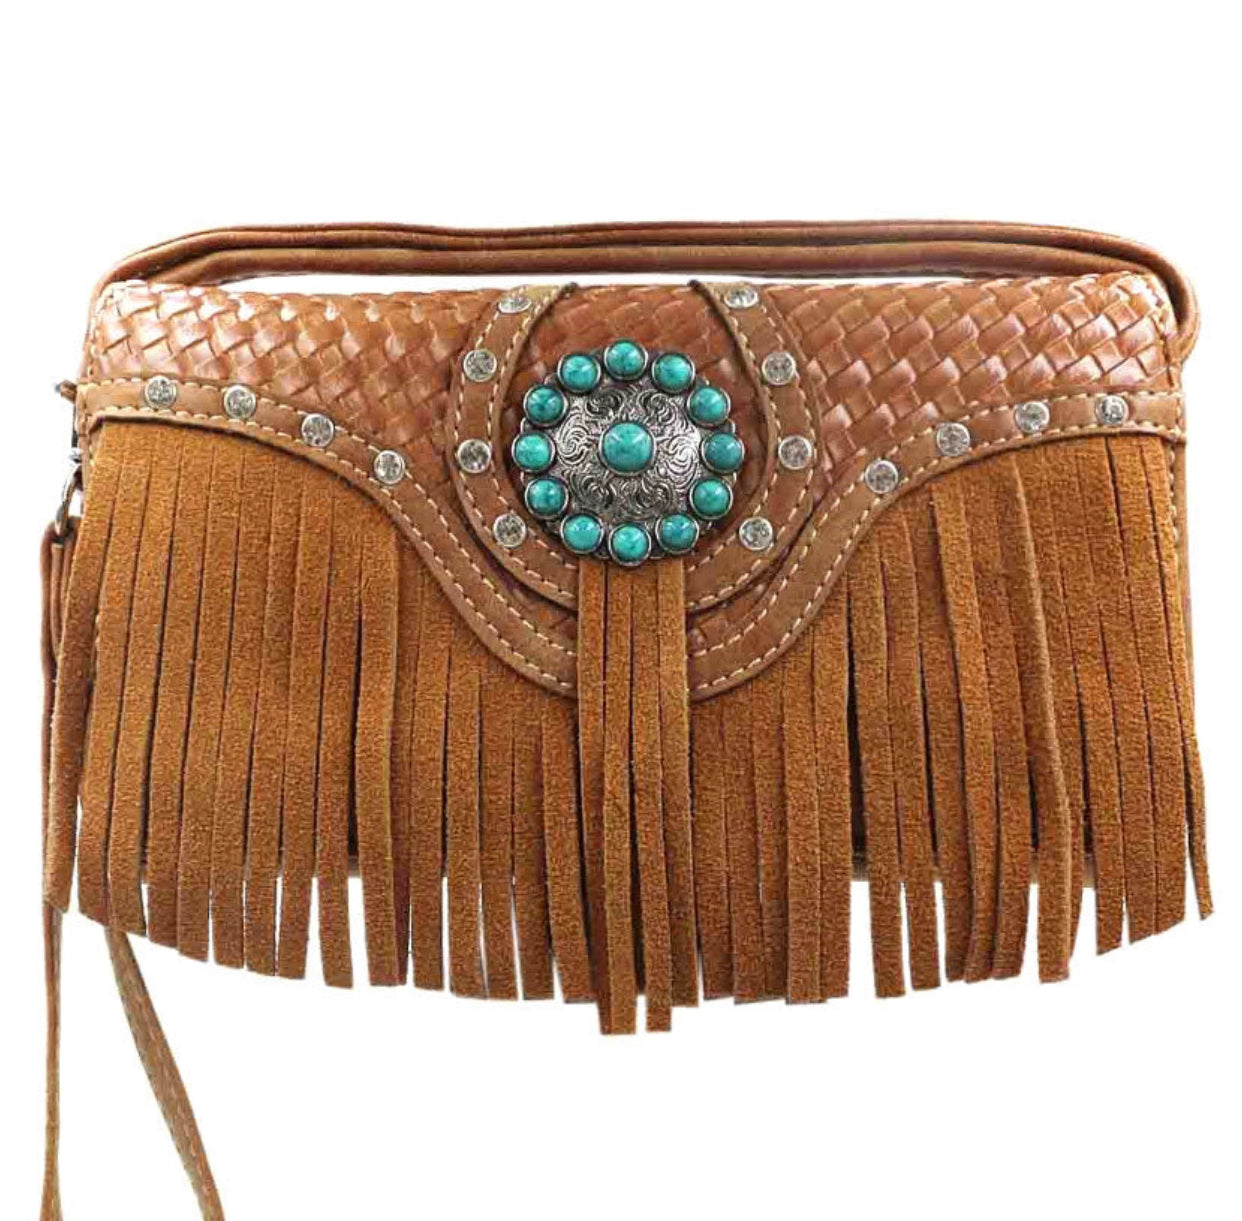 A8330 - Western Turquoise Accent with Fringe Wallet